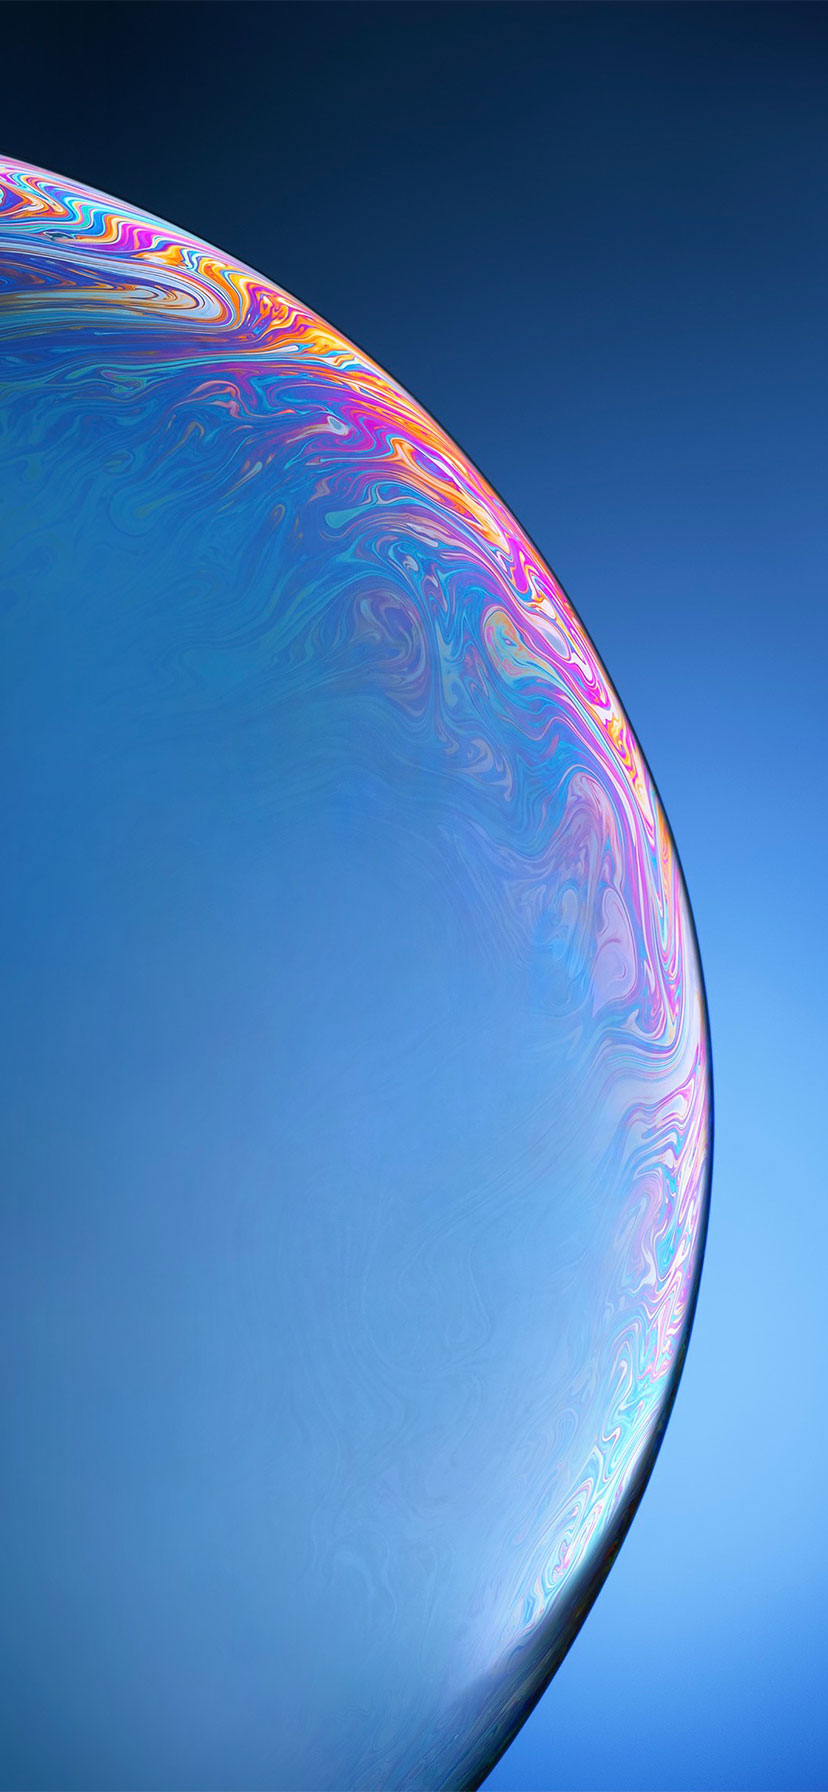 50 Best High Quality iPhone XR Wallpapers Backgrounds